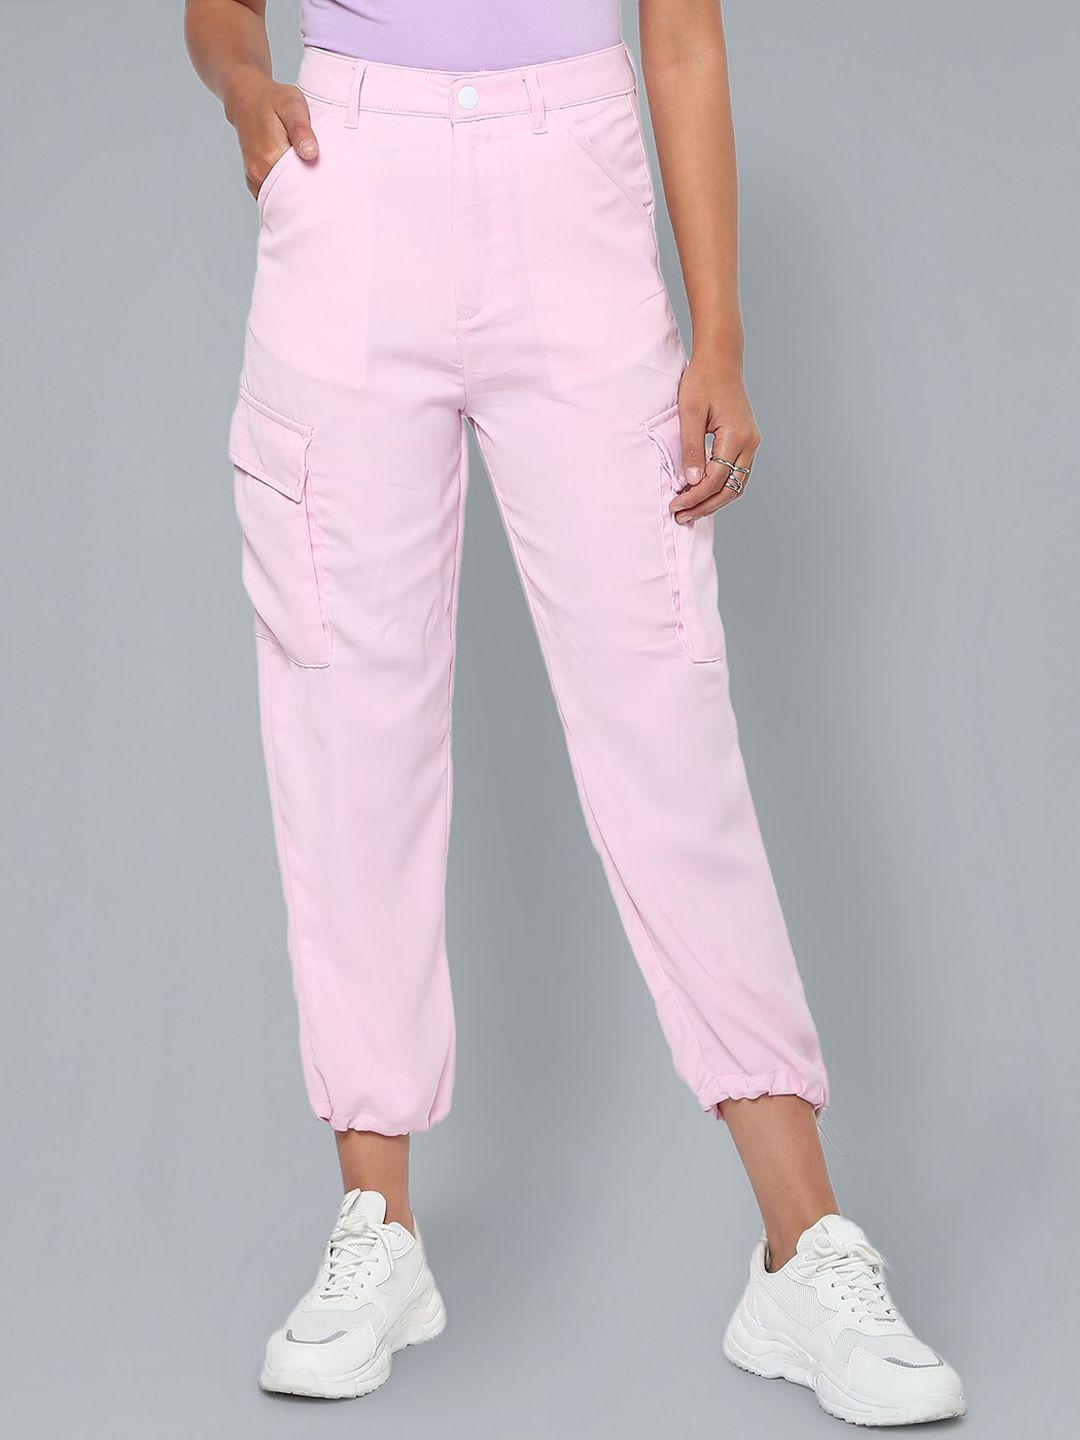 flying-machine-women-mid-rise-joggers-trousers